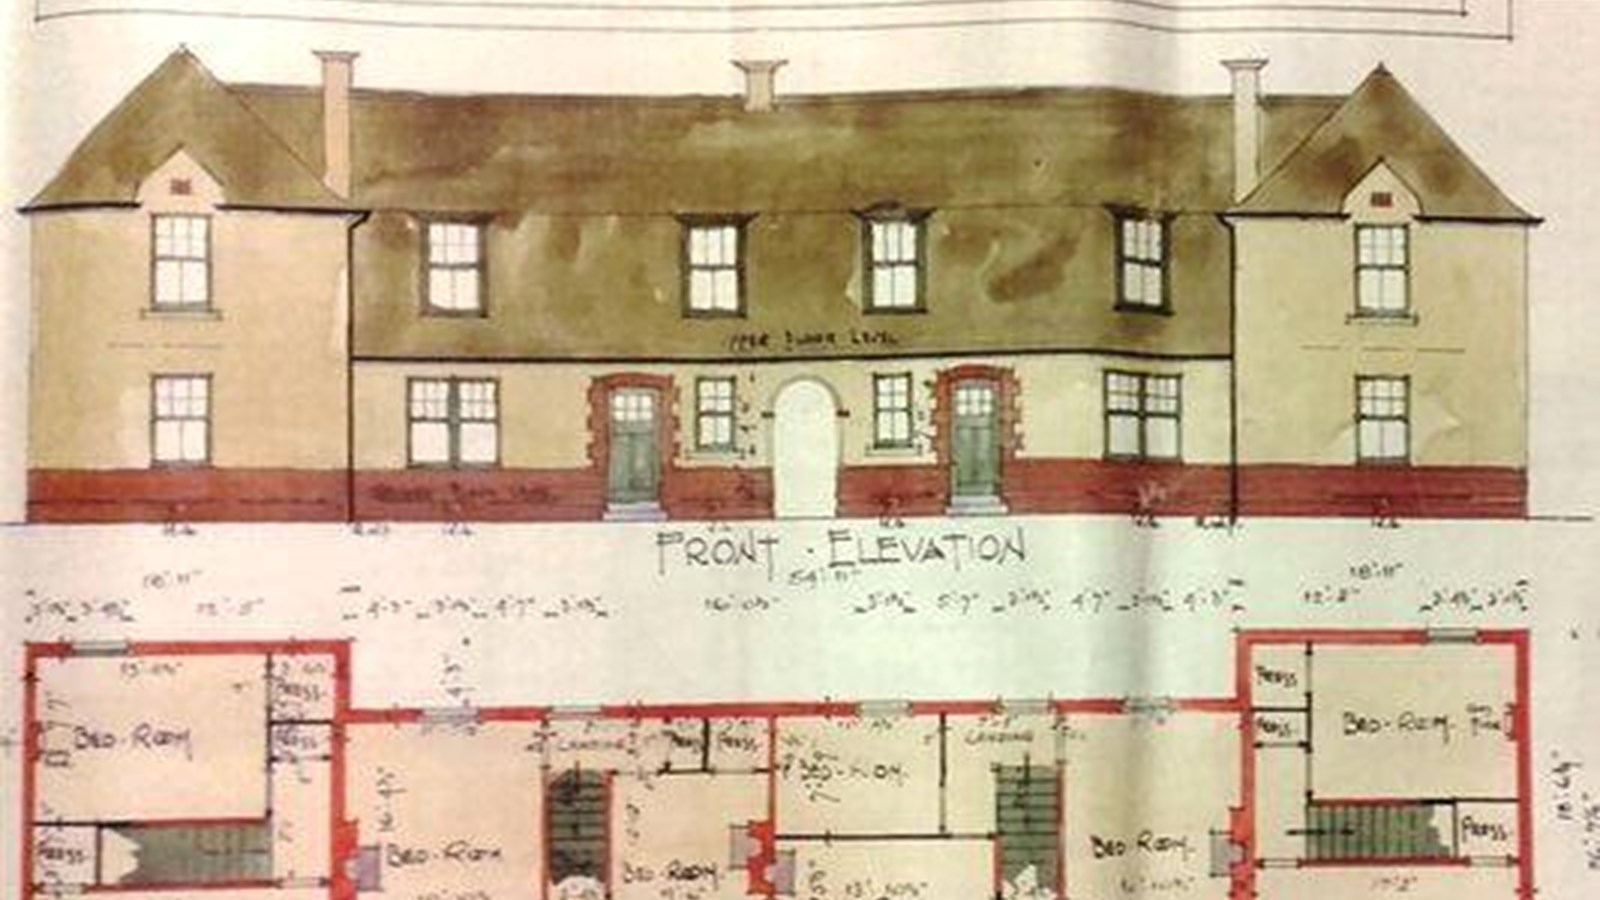 A drawing of a corporation built plan of a house in Knightswood including front elevation and floor plans.